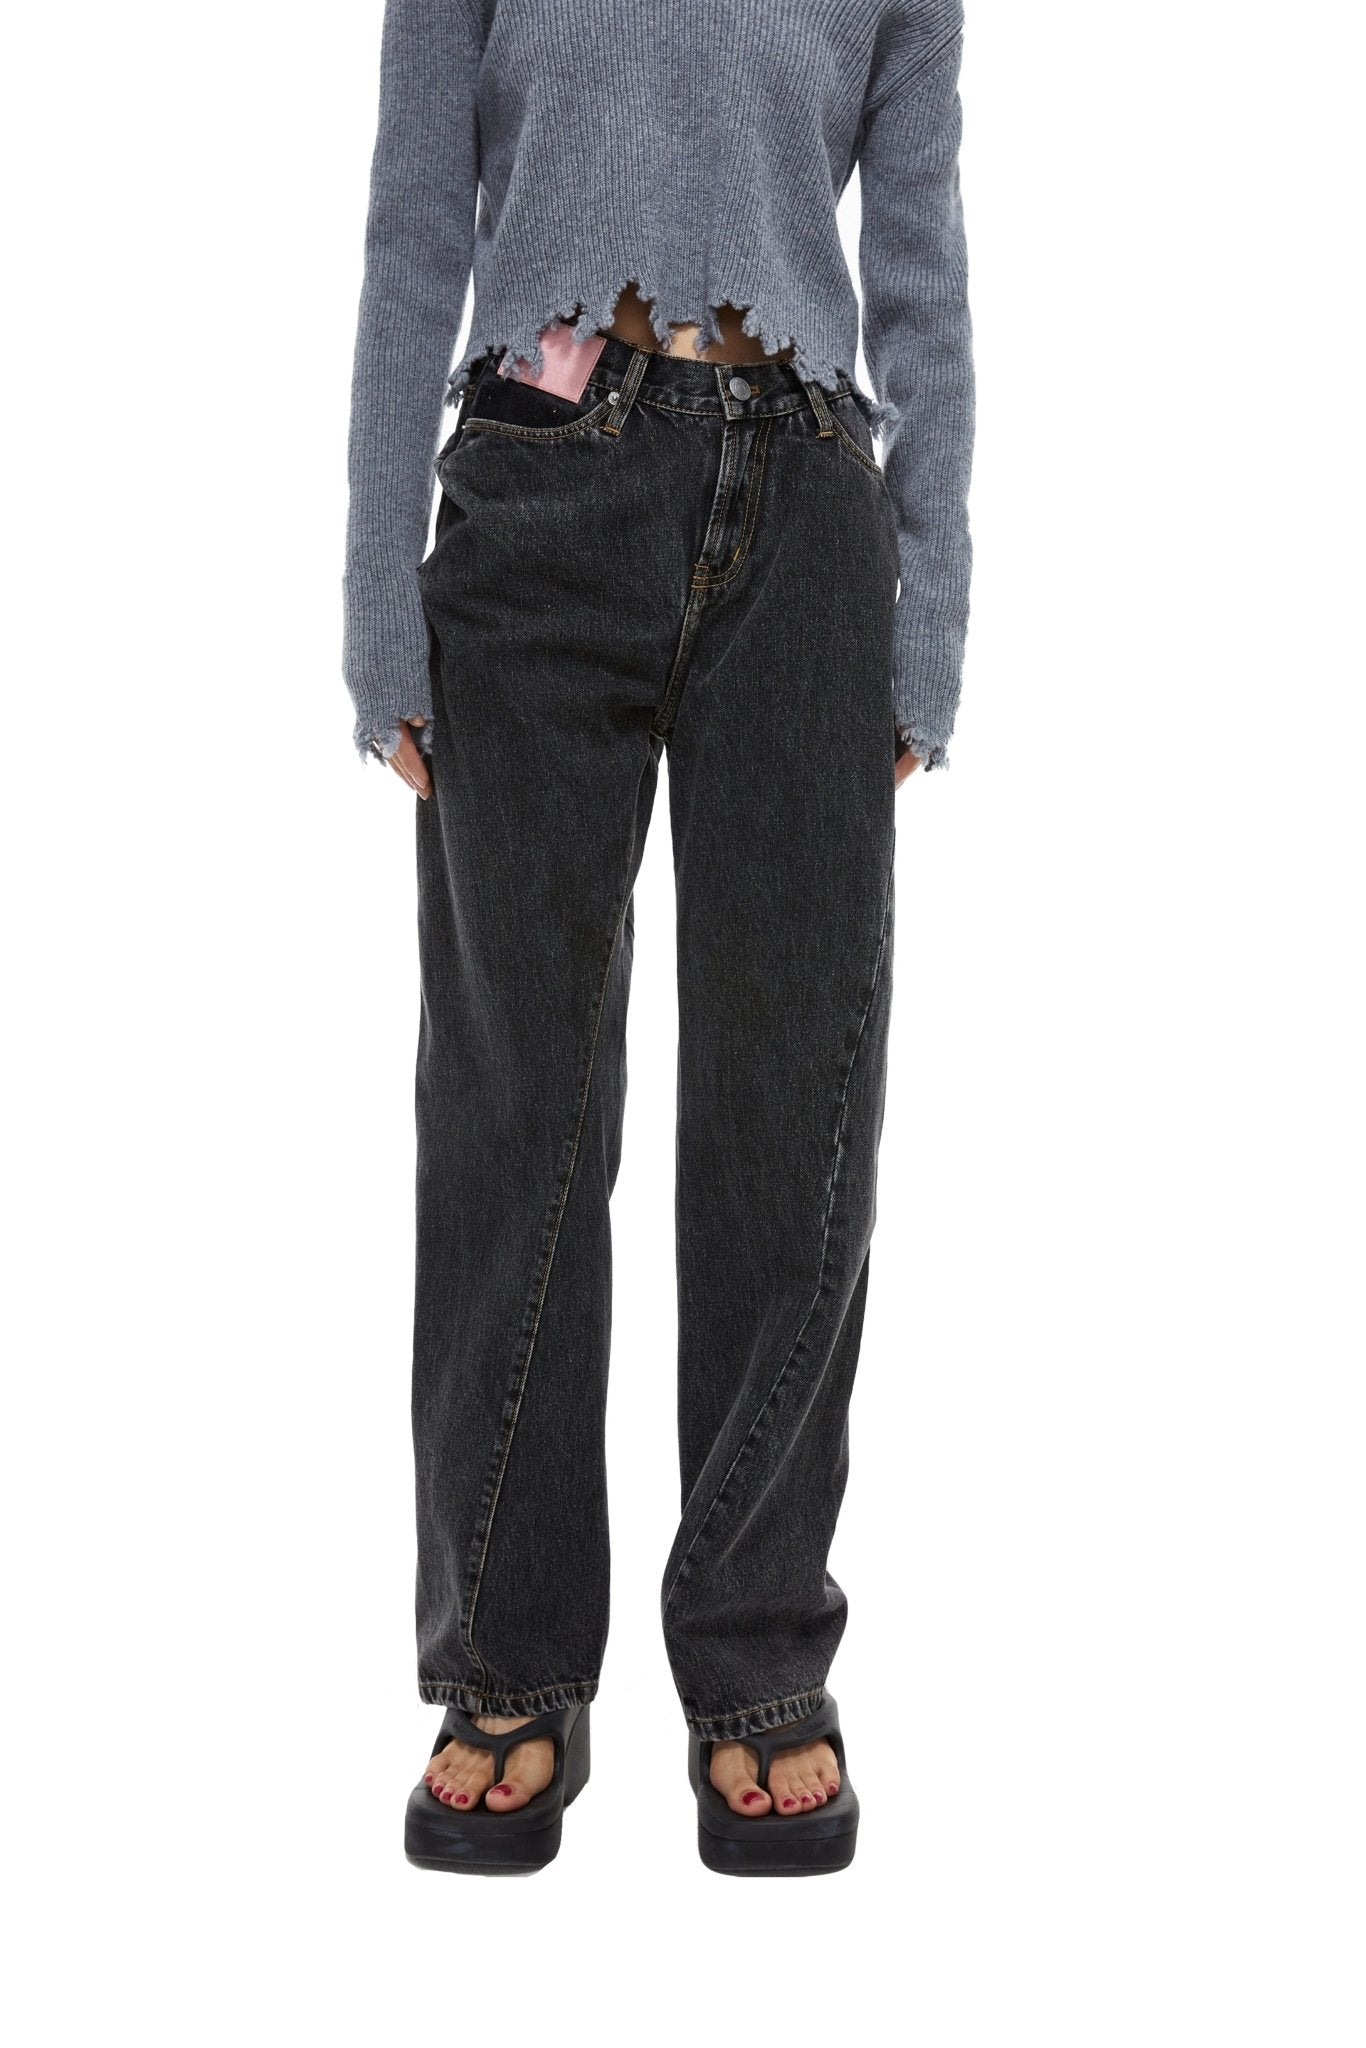 Ann Andelman Pink Leather Distressed Jeans